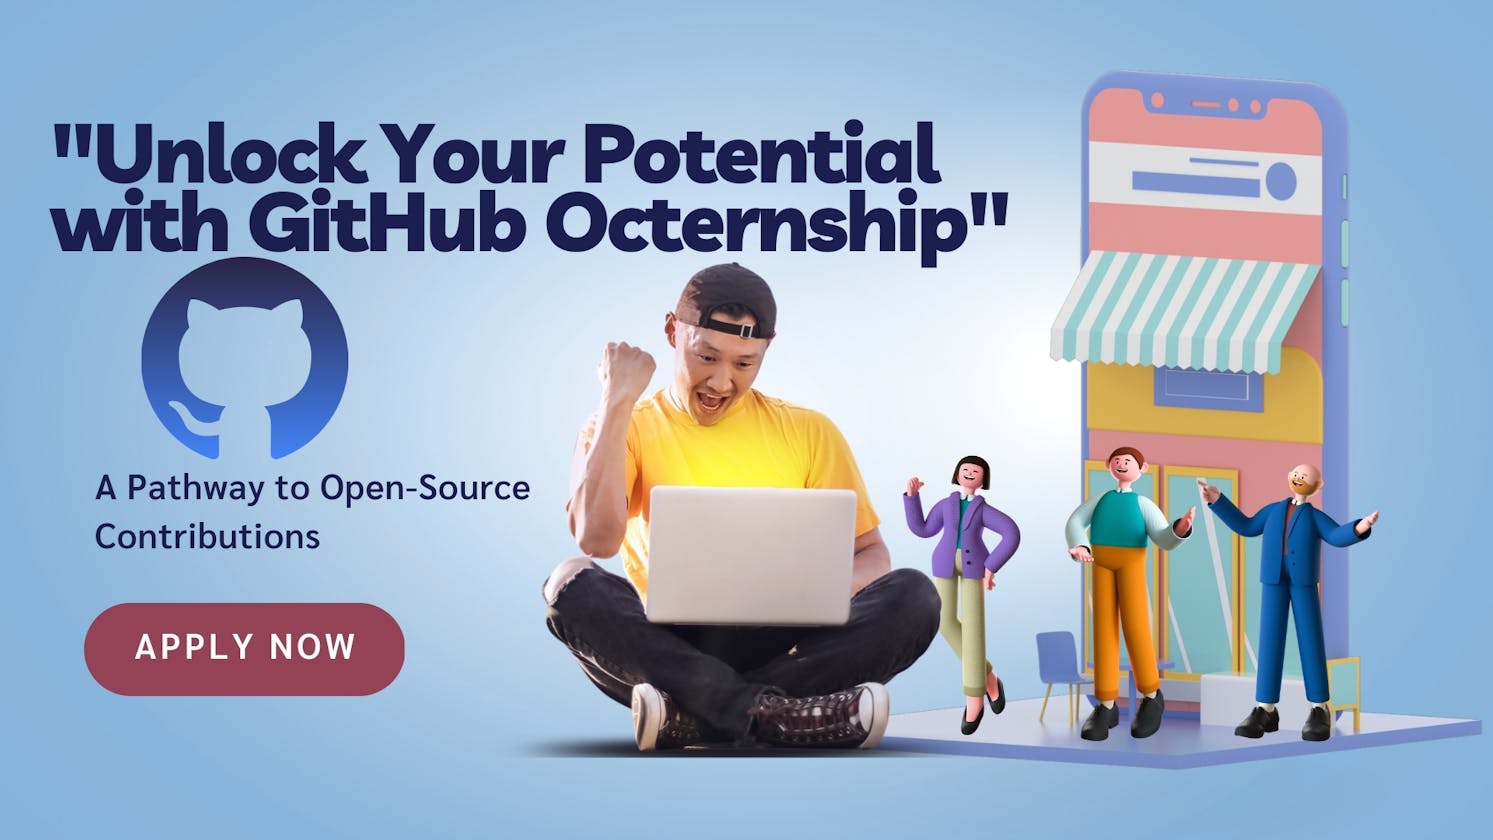 "Unlock Your Potential with GitHub Octernship: A Pathway to Open-Source Contributions"